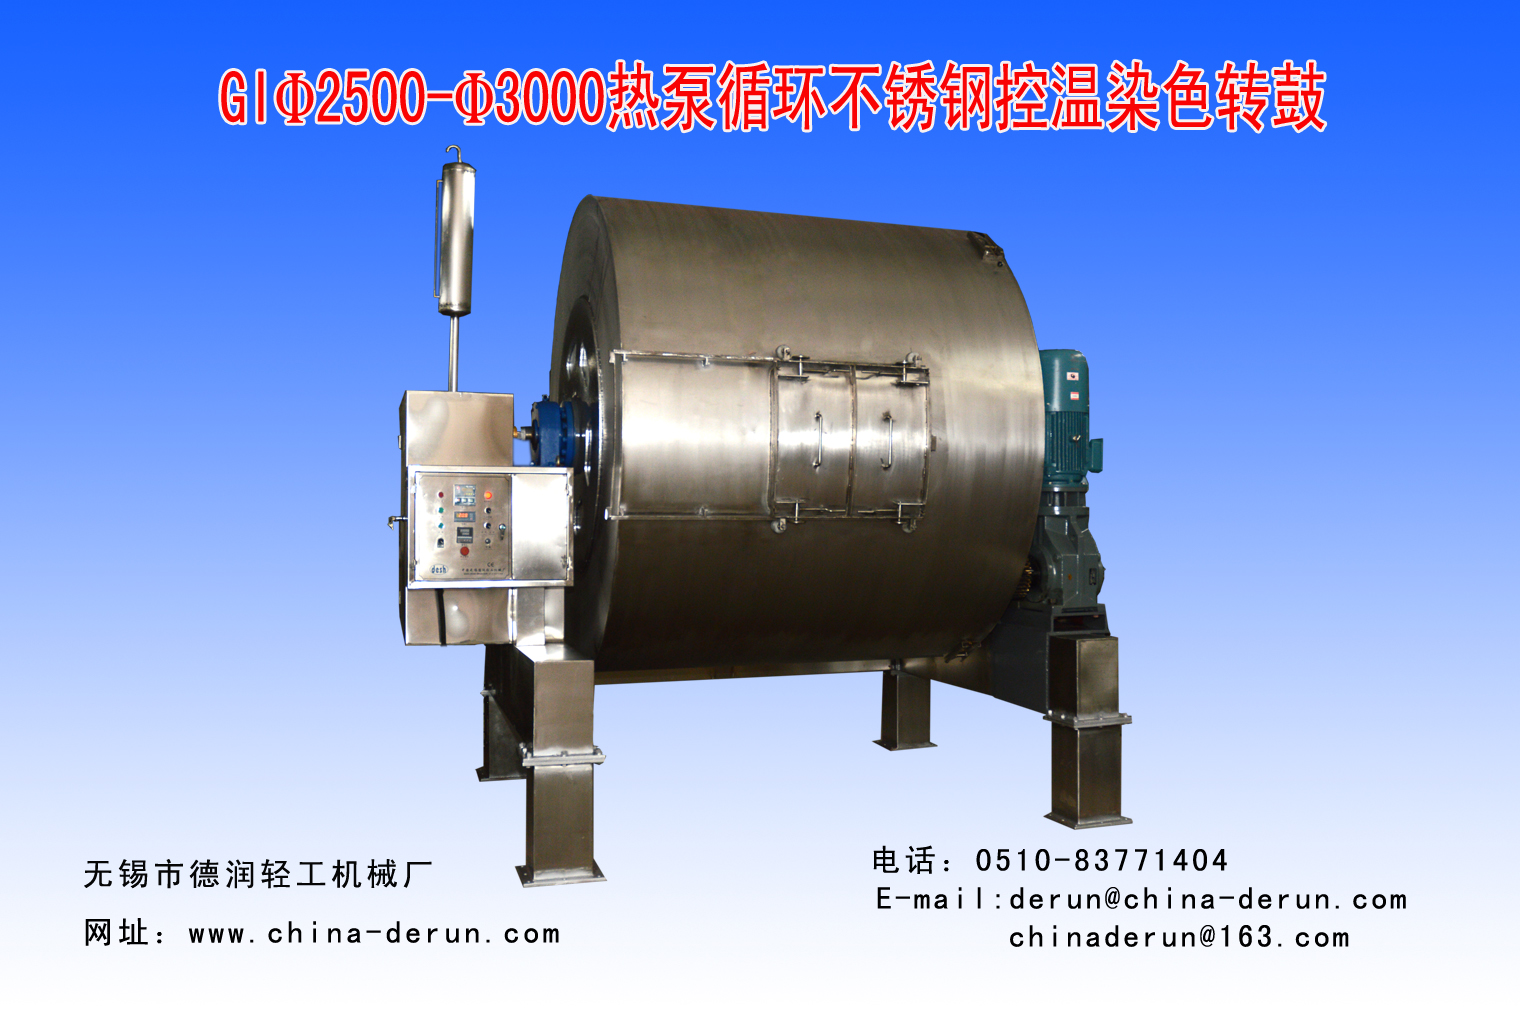 GIΦ2500-Φ3000热泵循环不锈钢控温染色转鼓 GIΦ2500-Φ3000 Stainless steel temperature control dyeing drum